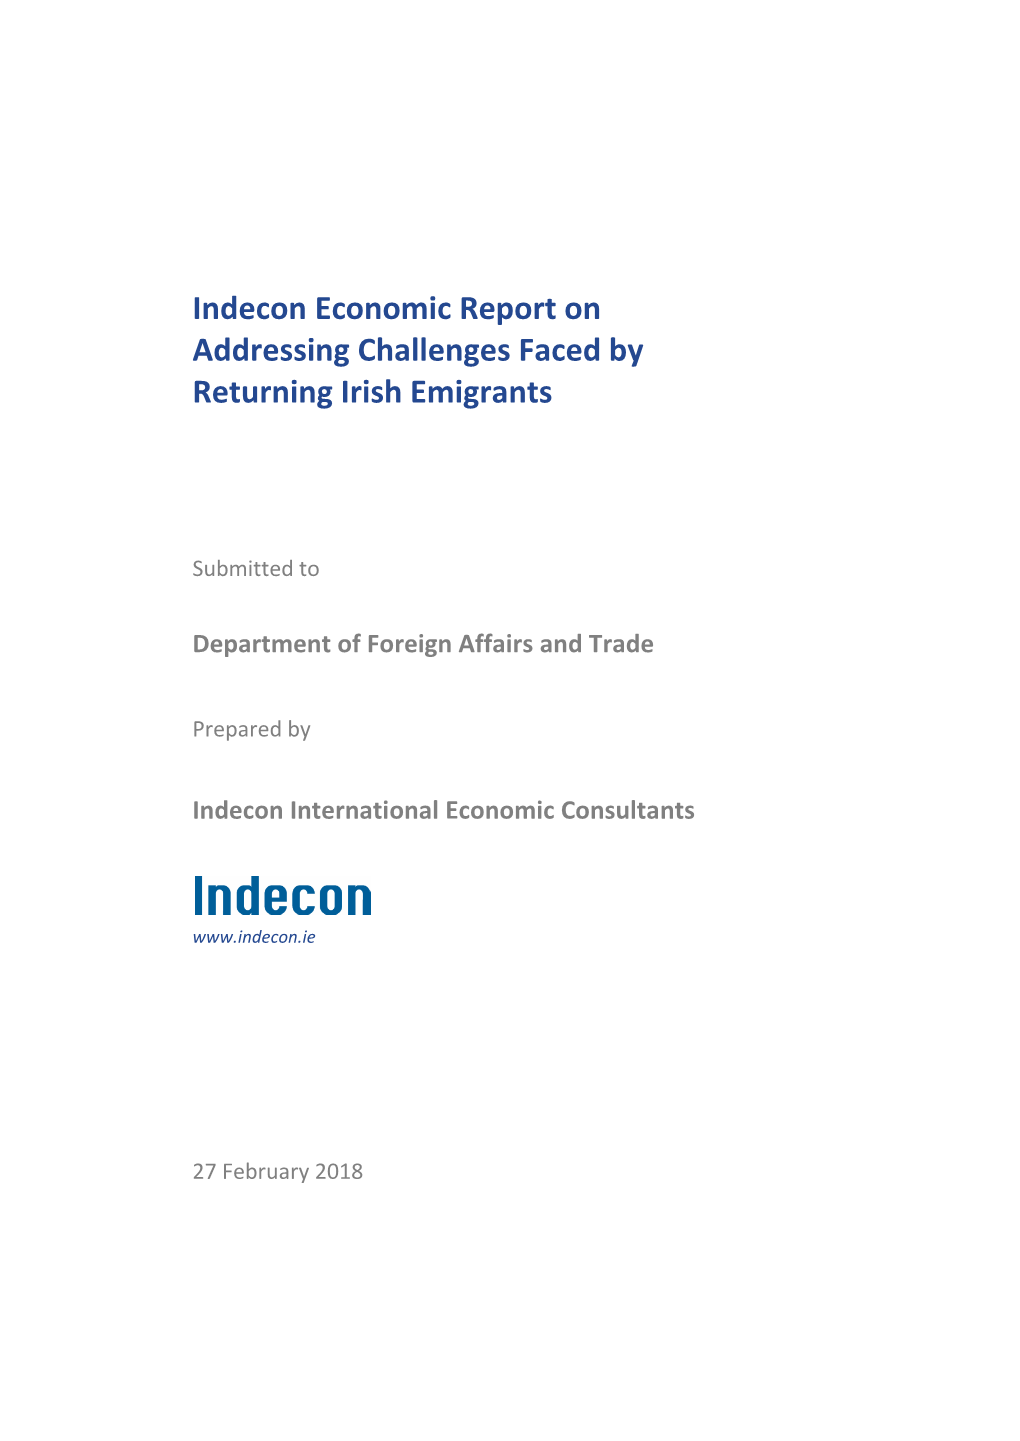 Report on Addressing Challenges Faced by Returning Irish Emigrants